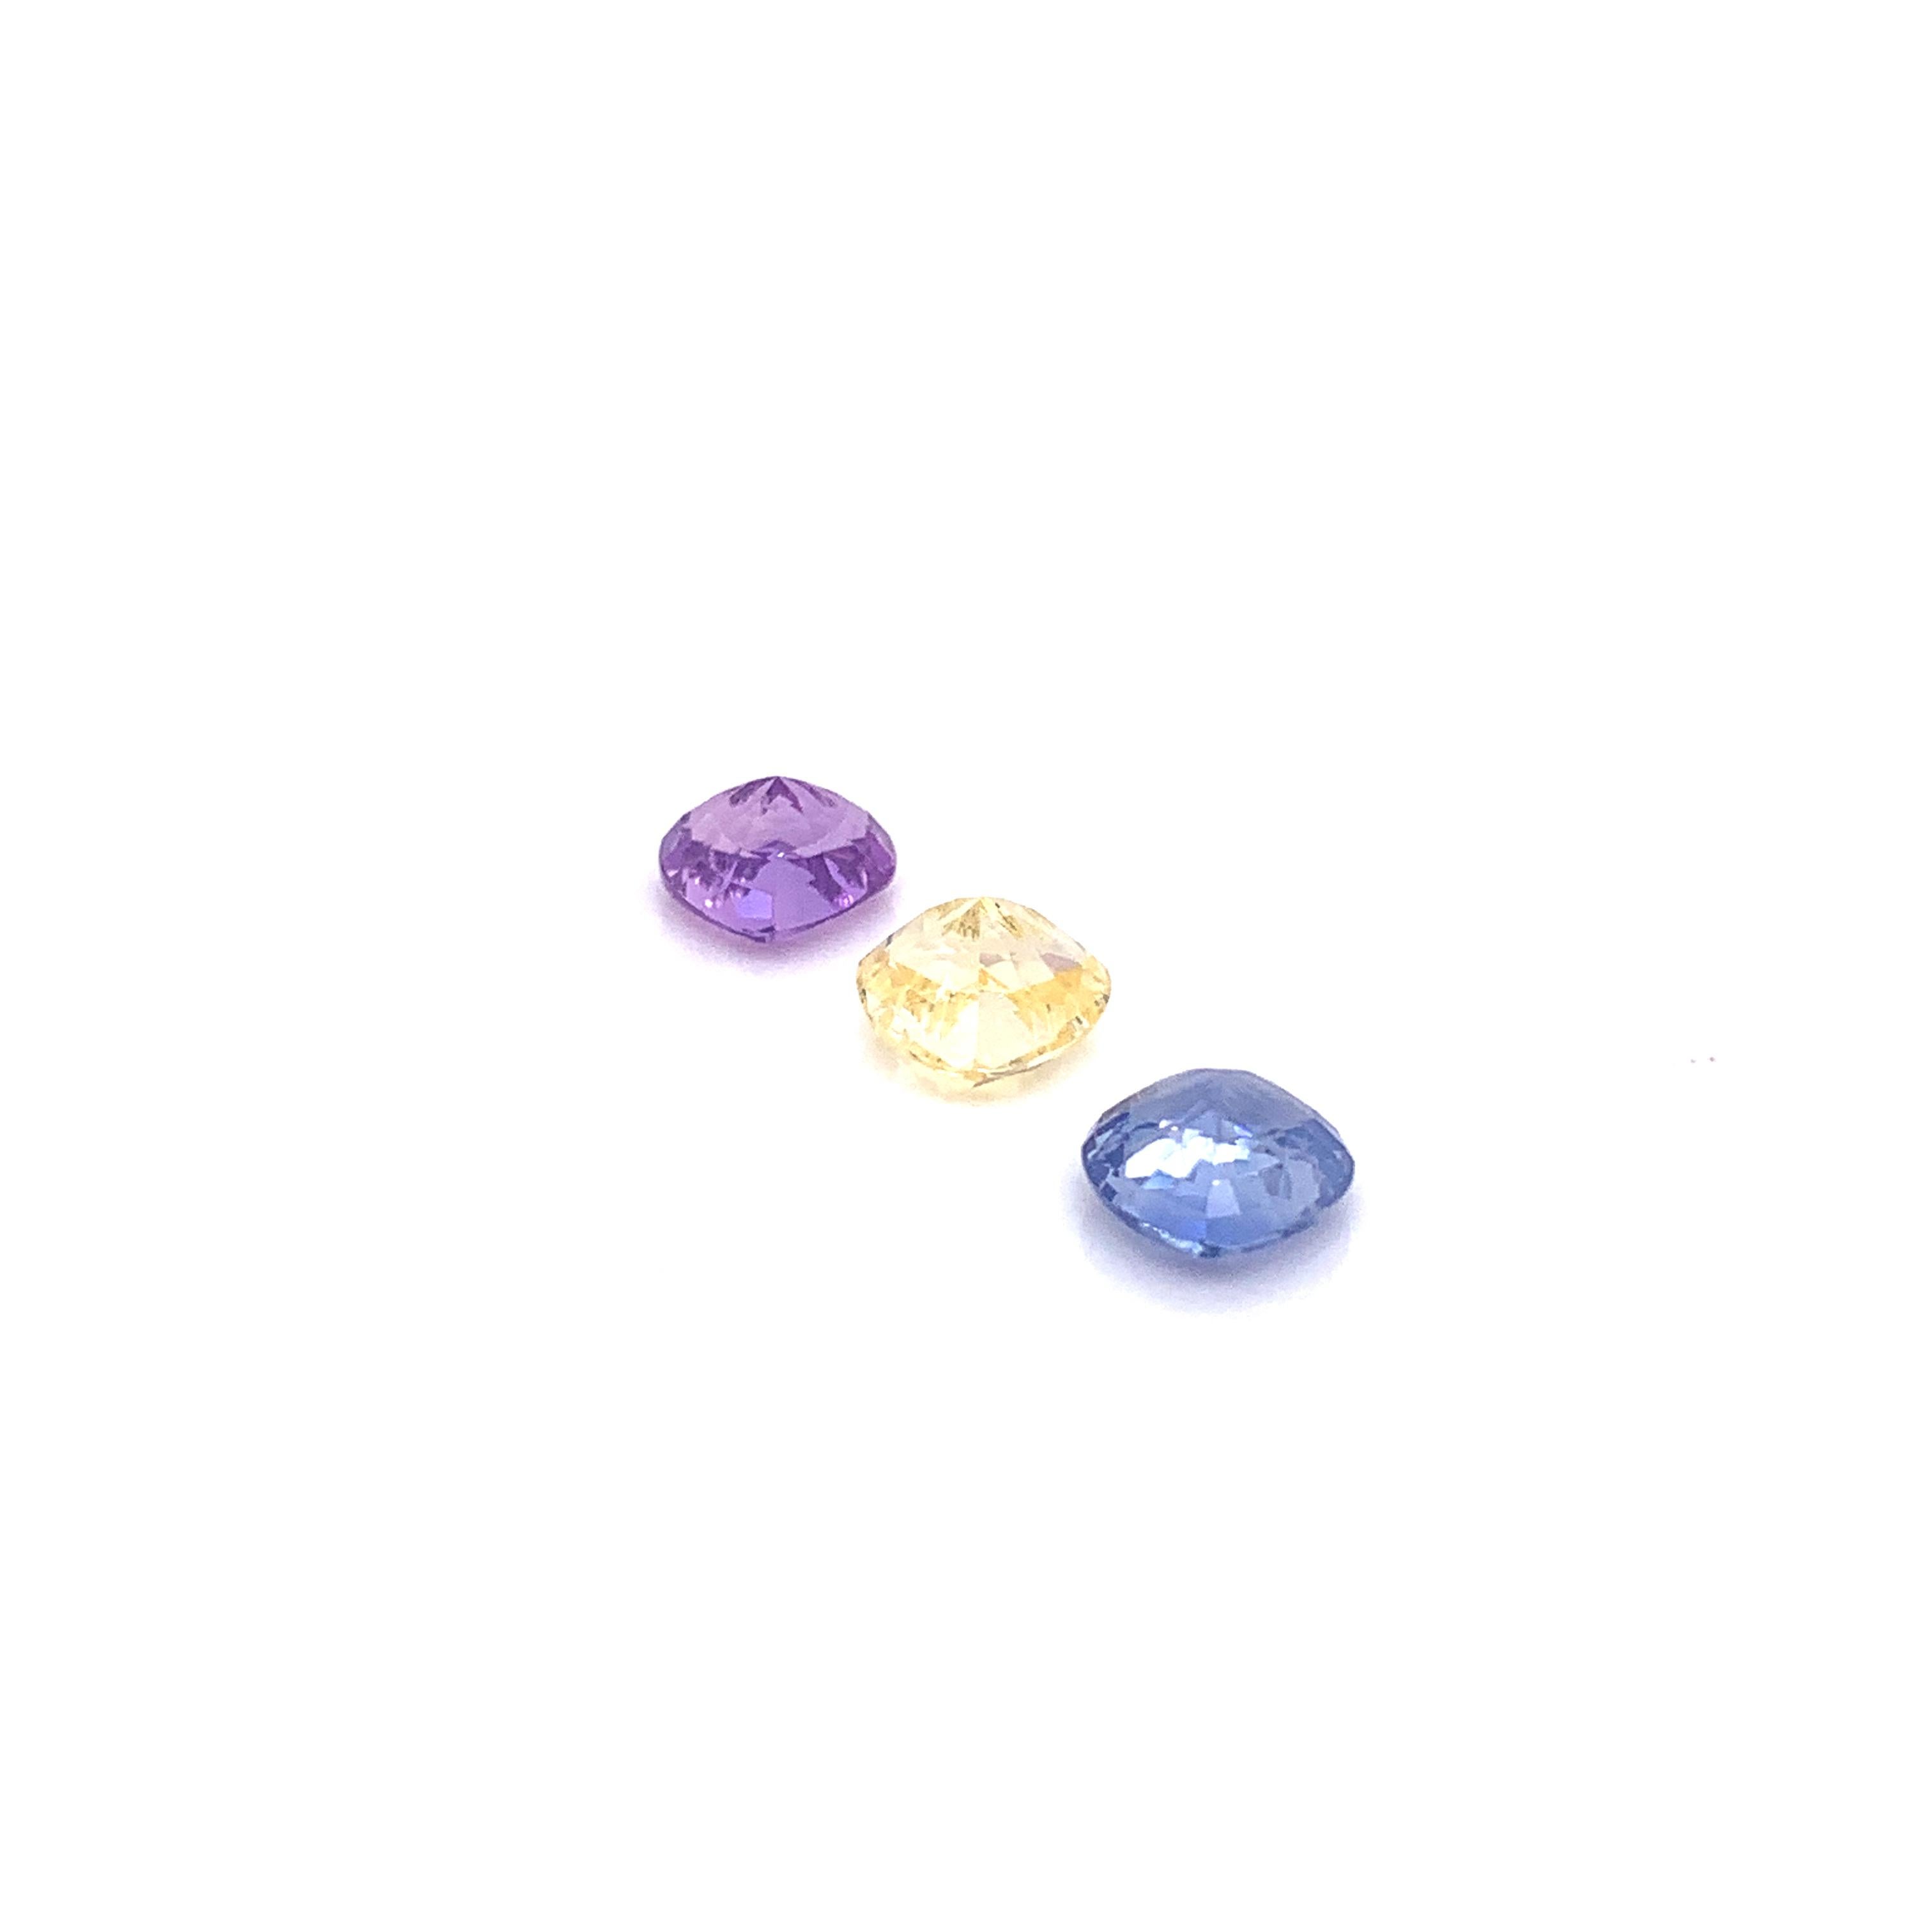 Heart Cut 7.22 Carat Heart-Shaped Unheated Blue, Pink, and Yellow Sapphire Trio For Sale